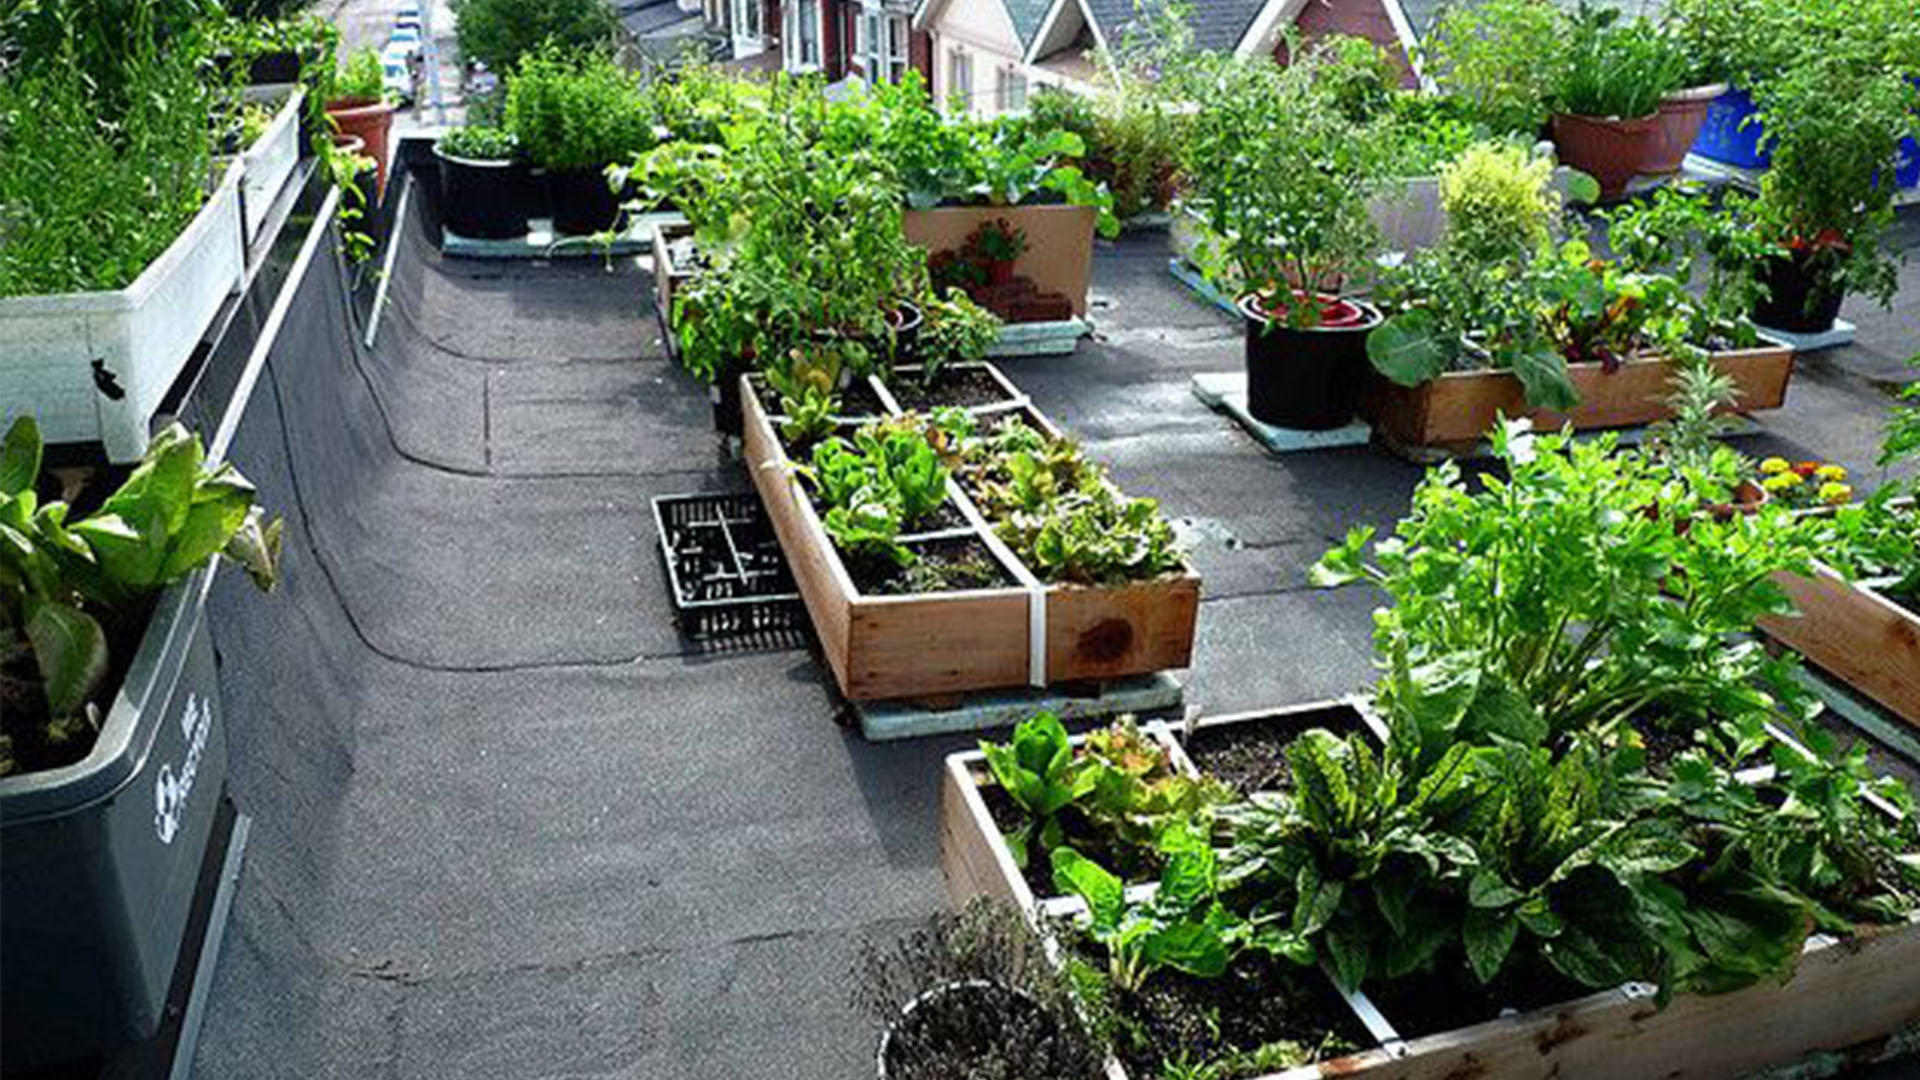 Growing your own food at roof organically